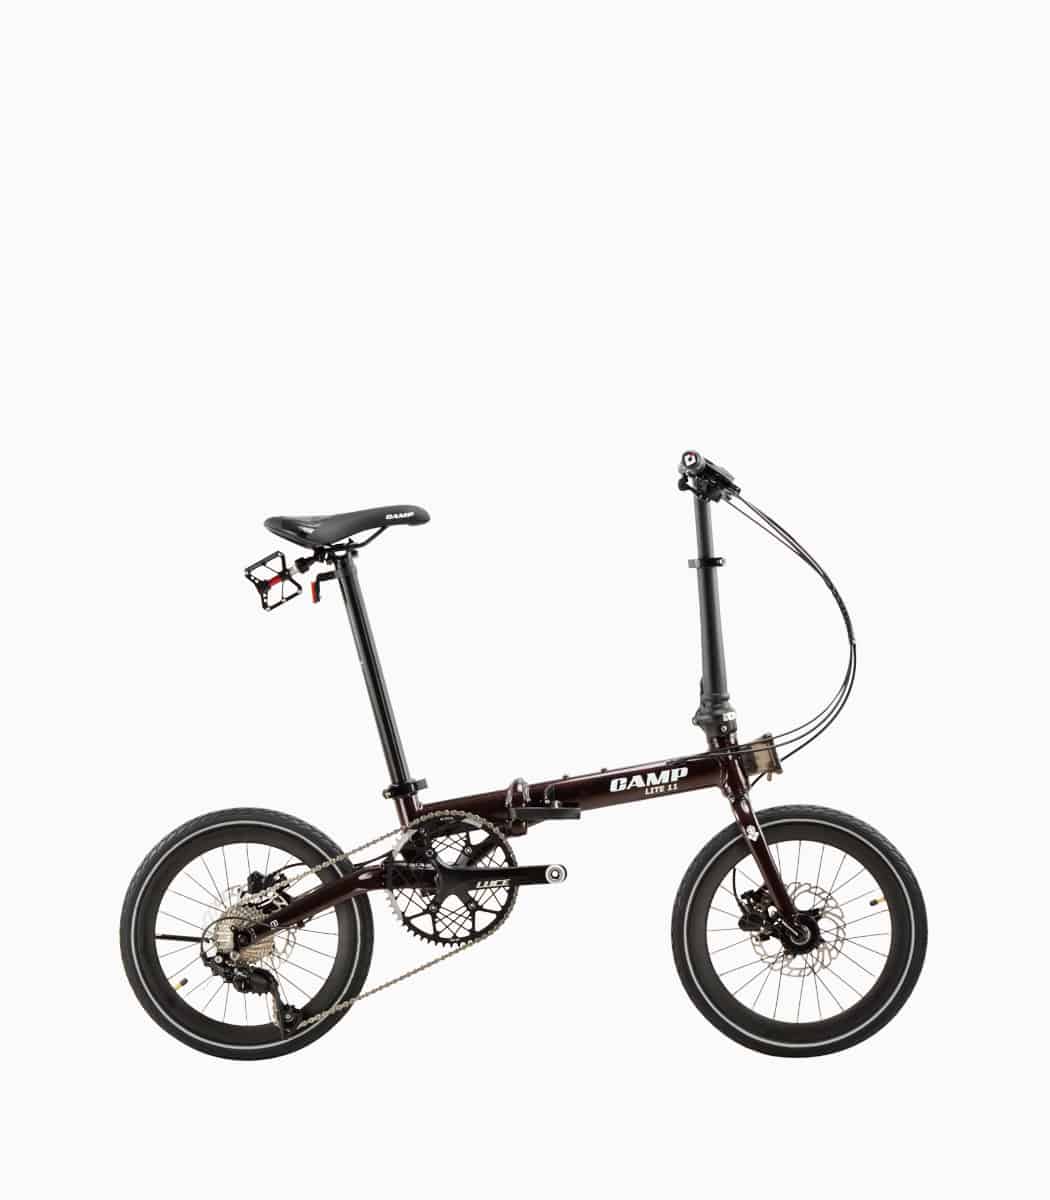 CAMP Lite 11 (BLACK CHERRY PEARL) foldable bicycle with reflective tyres right